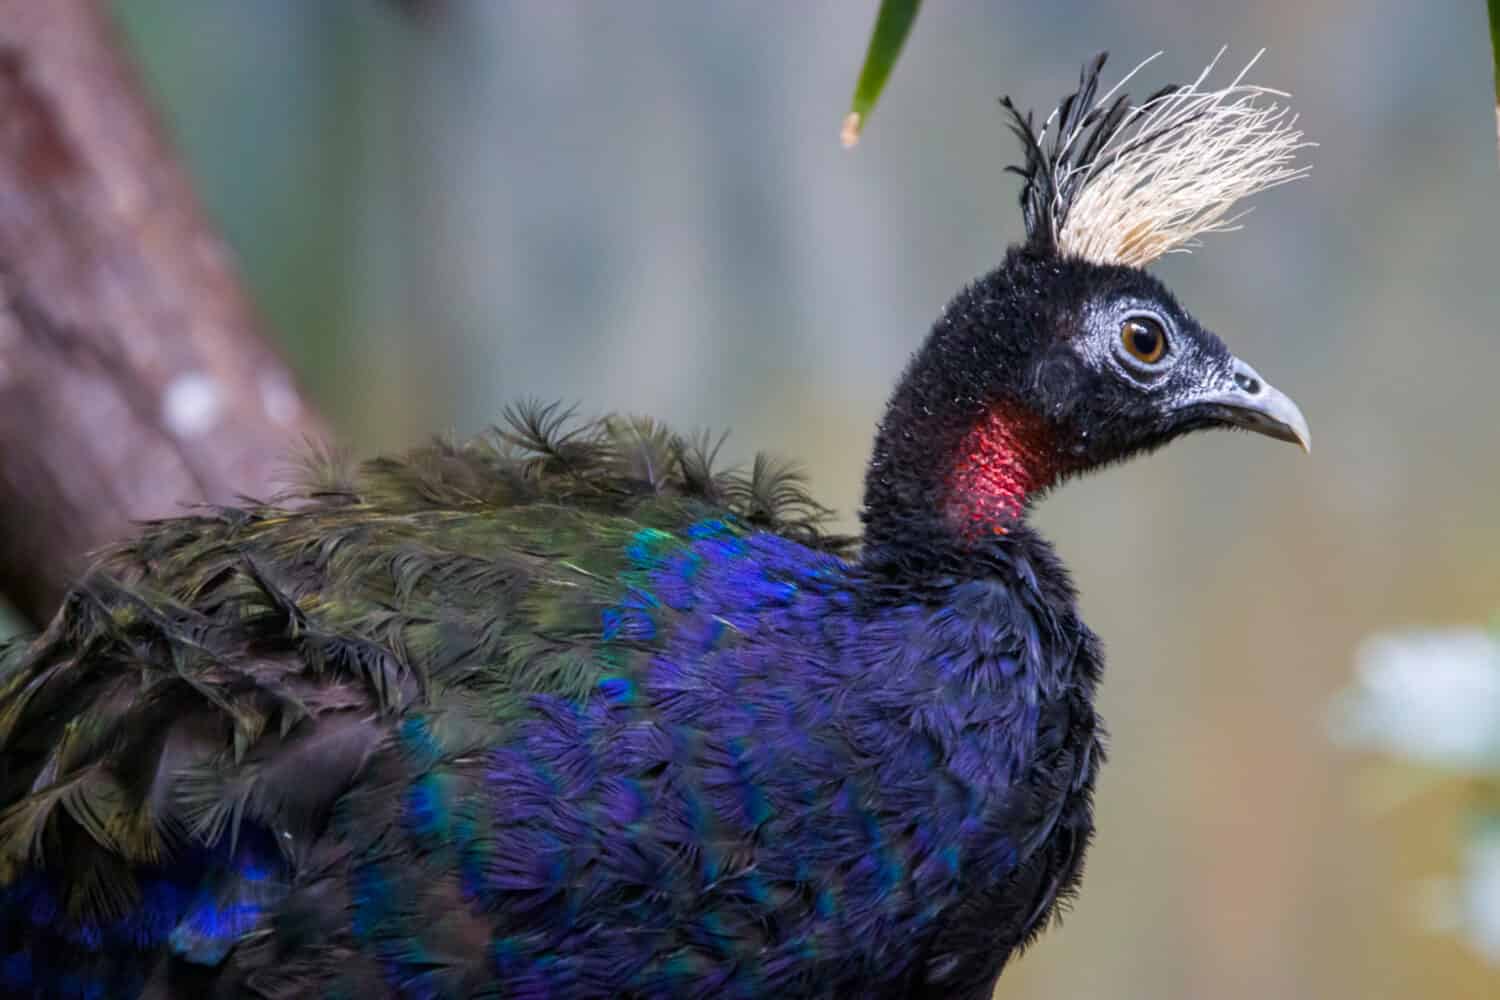 A male Congo peafowl. it is a species of peafowl native to the Congo Basin, one of three extant species of peafowl.the male's feathers are nevertheless deep blue with a metallic green and violet tinge